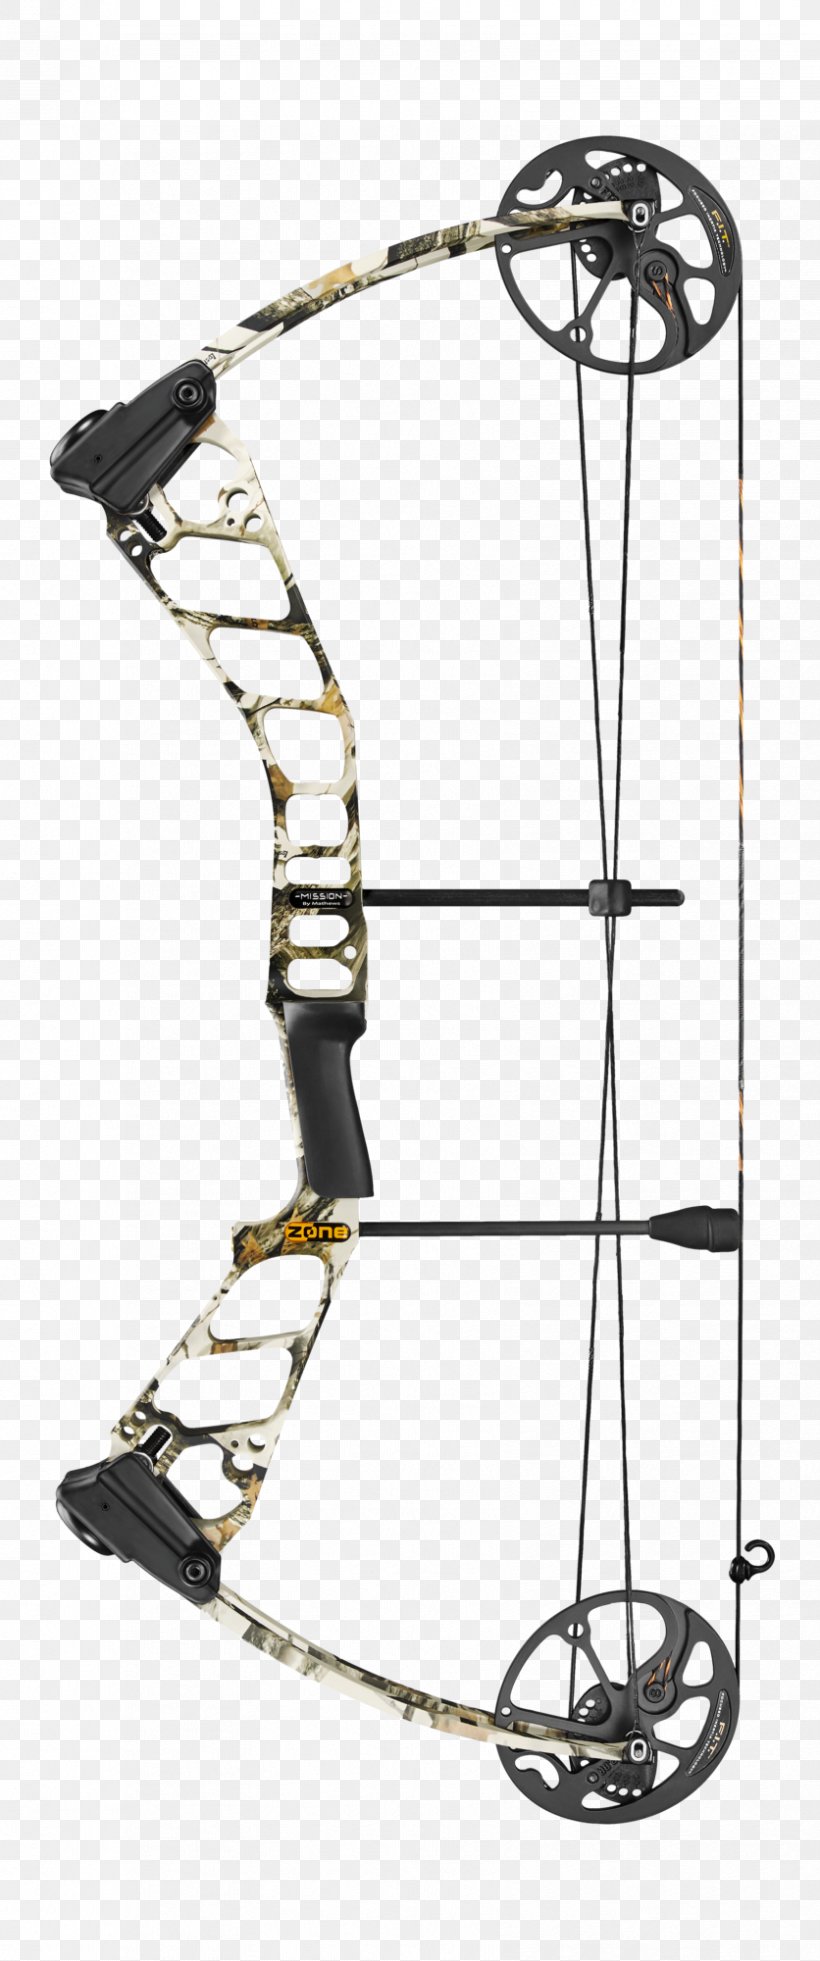 Compound Bows Archery Bow And Arrow Bowhunting, PNG, 836x2000px, Compound Bows, Archery, Archery Country, Bow And Arrow, Bowhunting Download Free